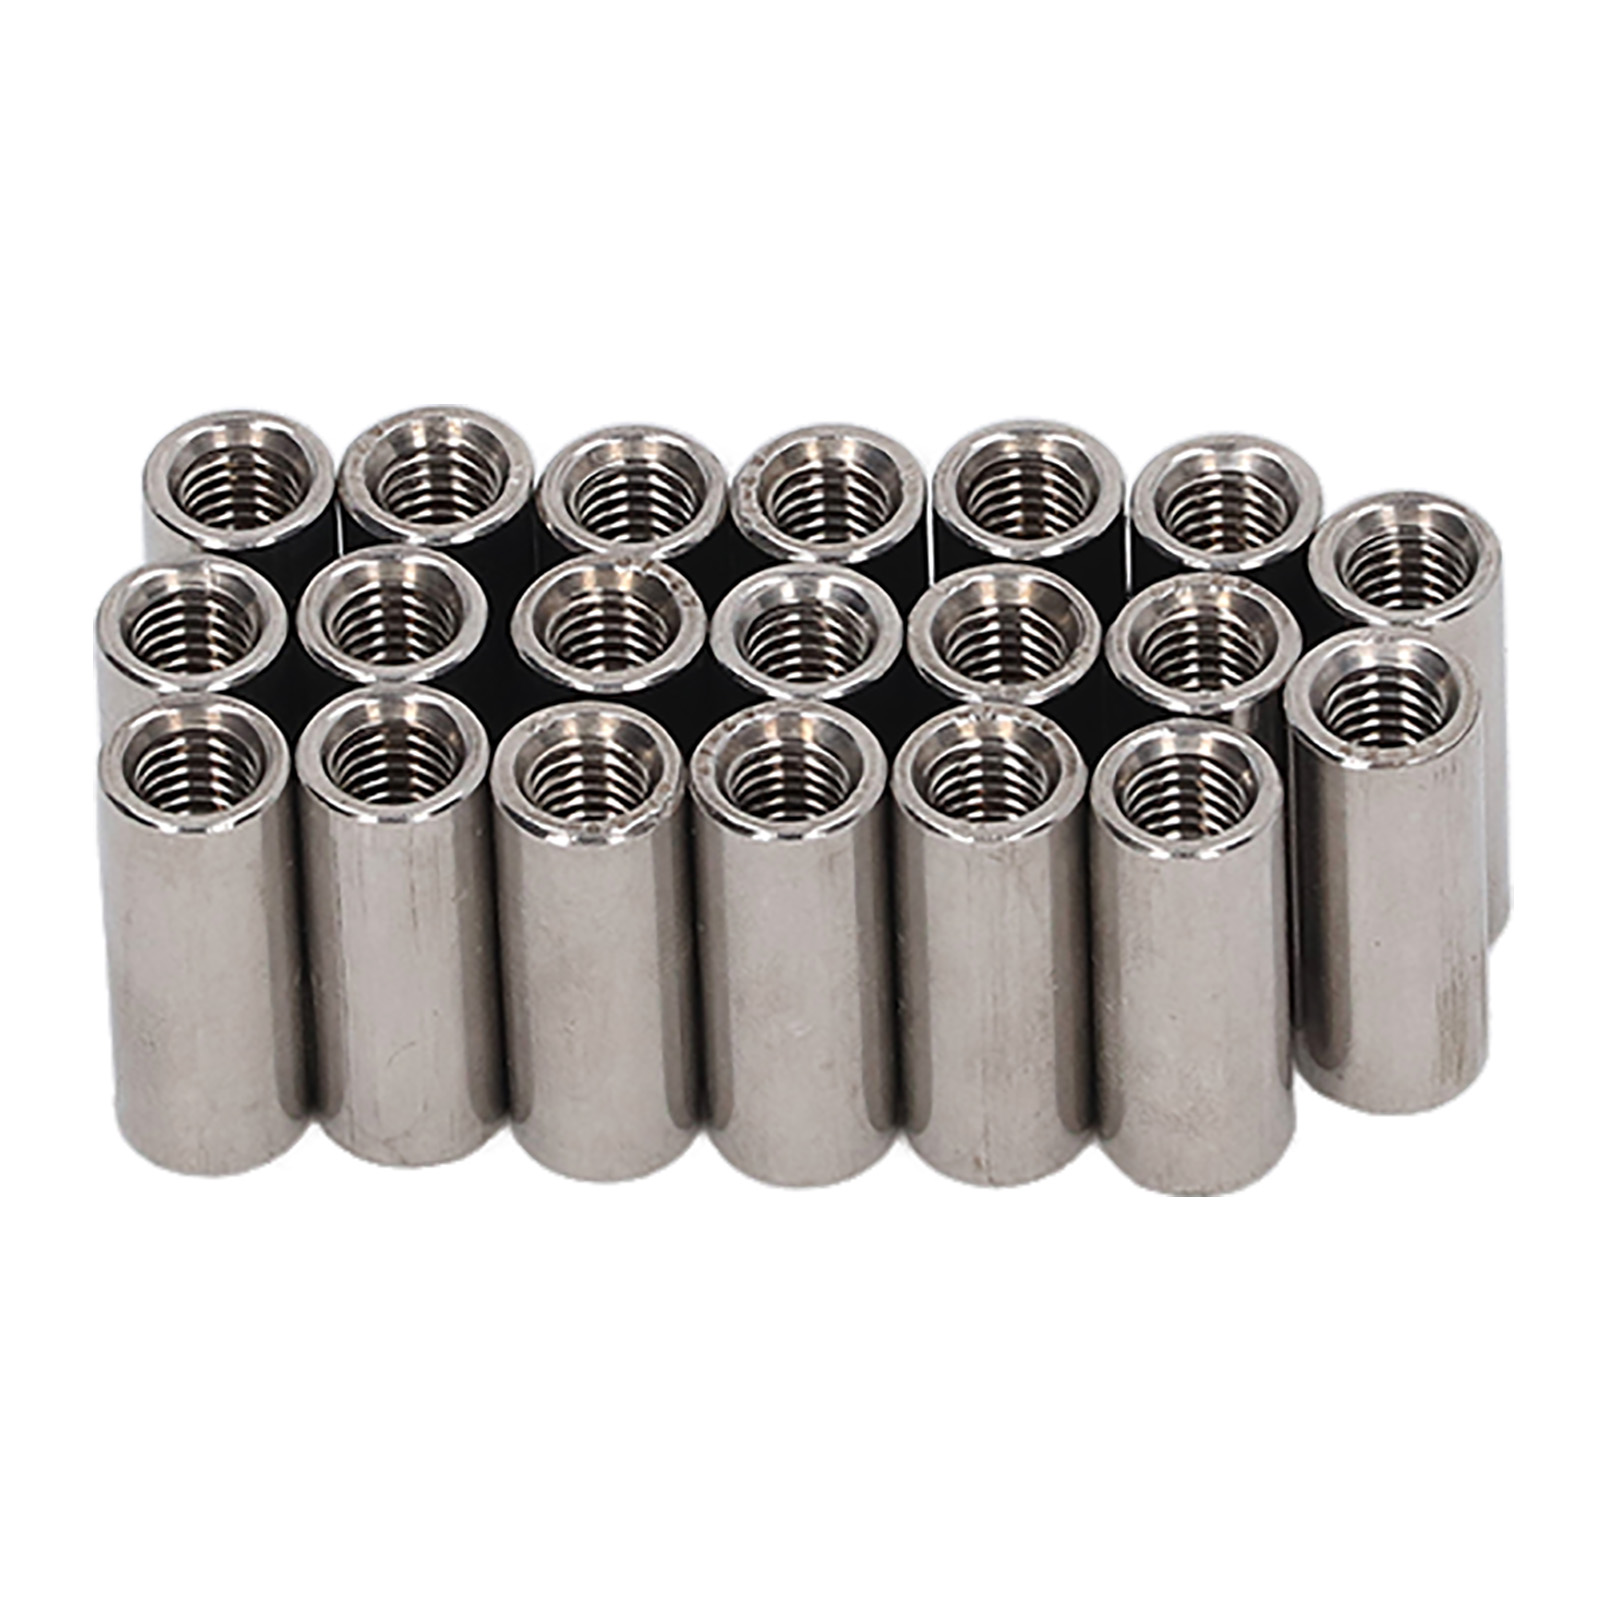 clearance 20Pcs Coupling Nut Stainless Steel M5 Round Rod Connector Nut ...